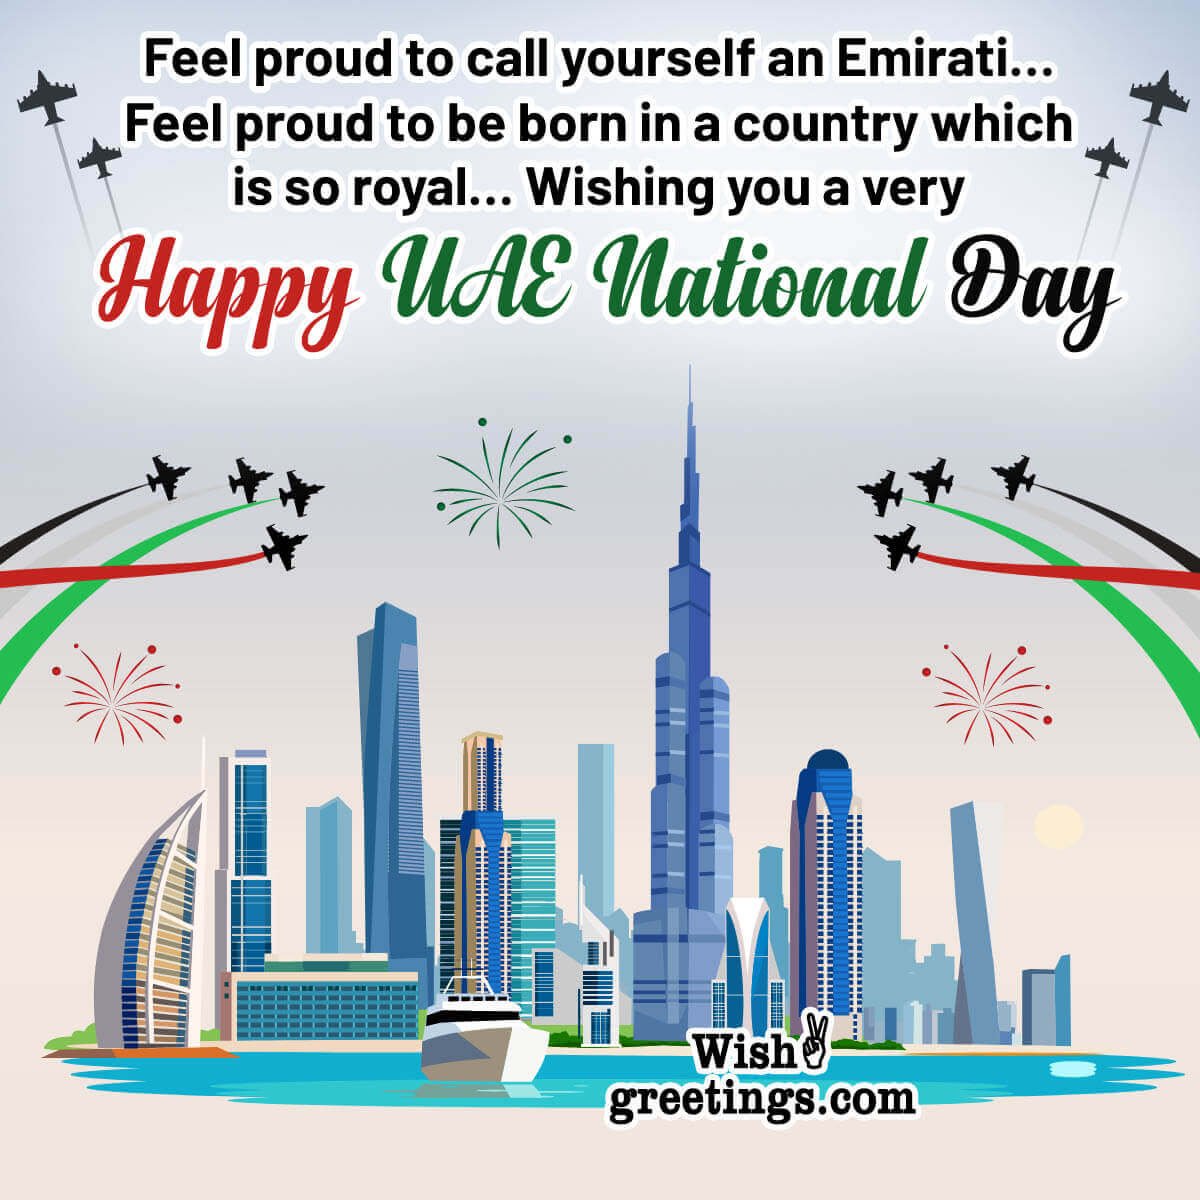 Happy Uae National Day Quote Image